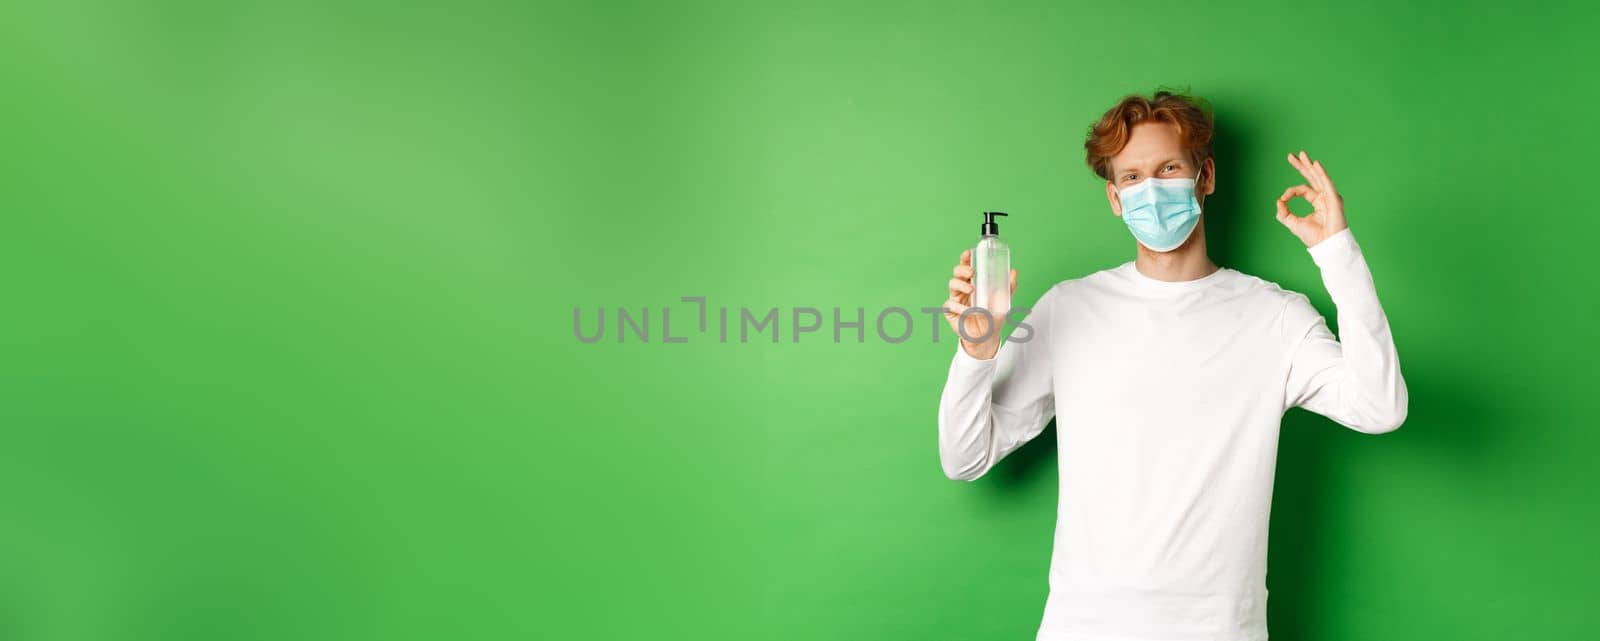 Covid-19, virus and social distancing concept. Smiling young man with red hair, wearing face mask from coronavirus, showing okay sign and hand sanitizer, green background.